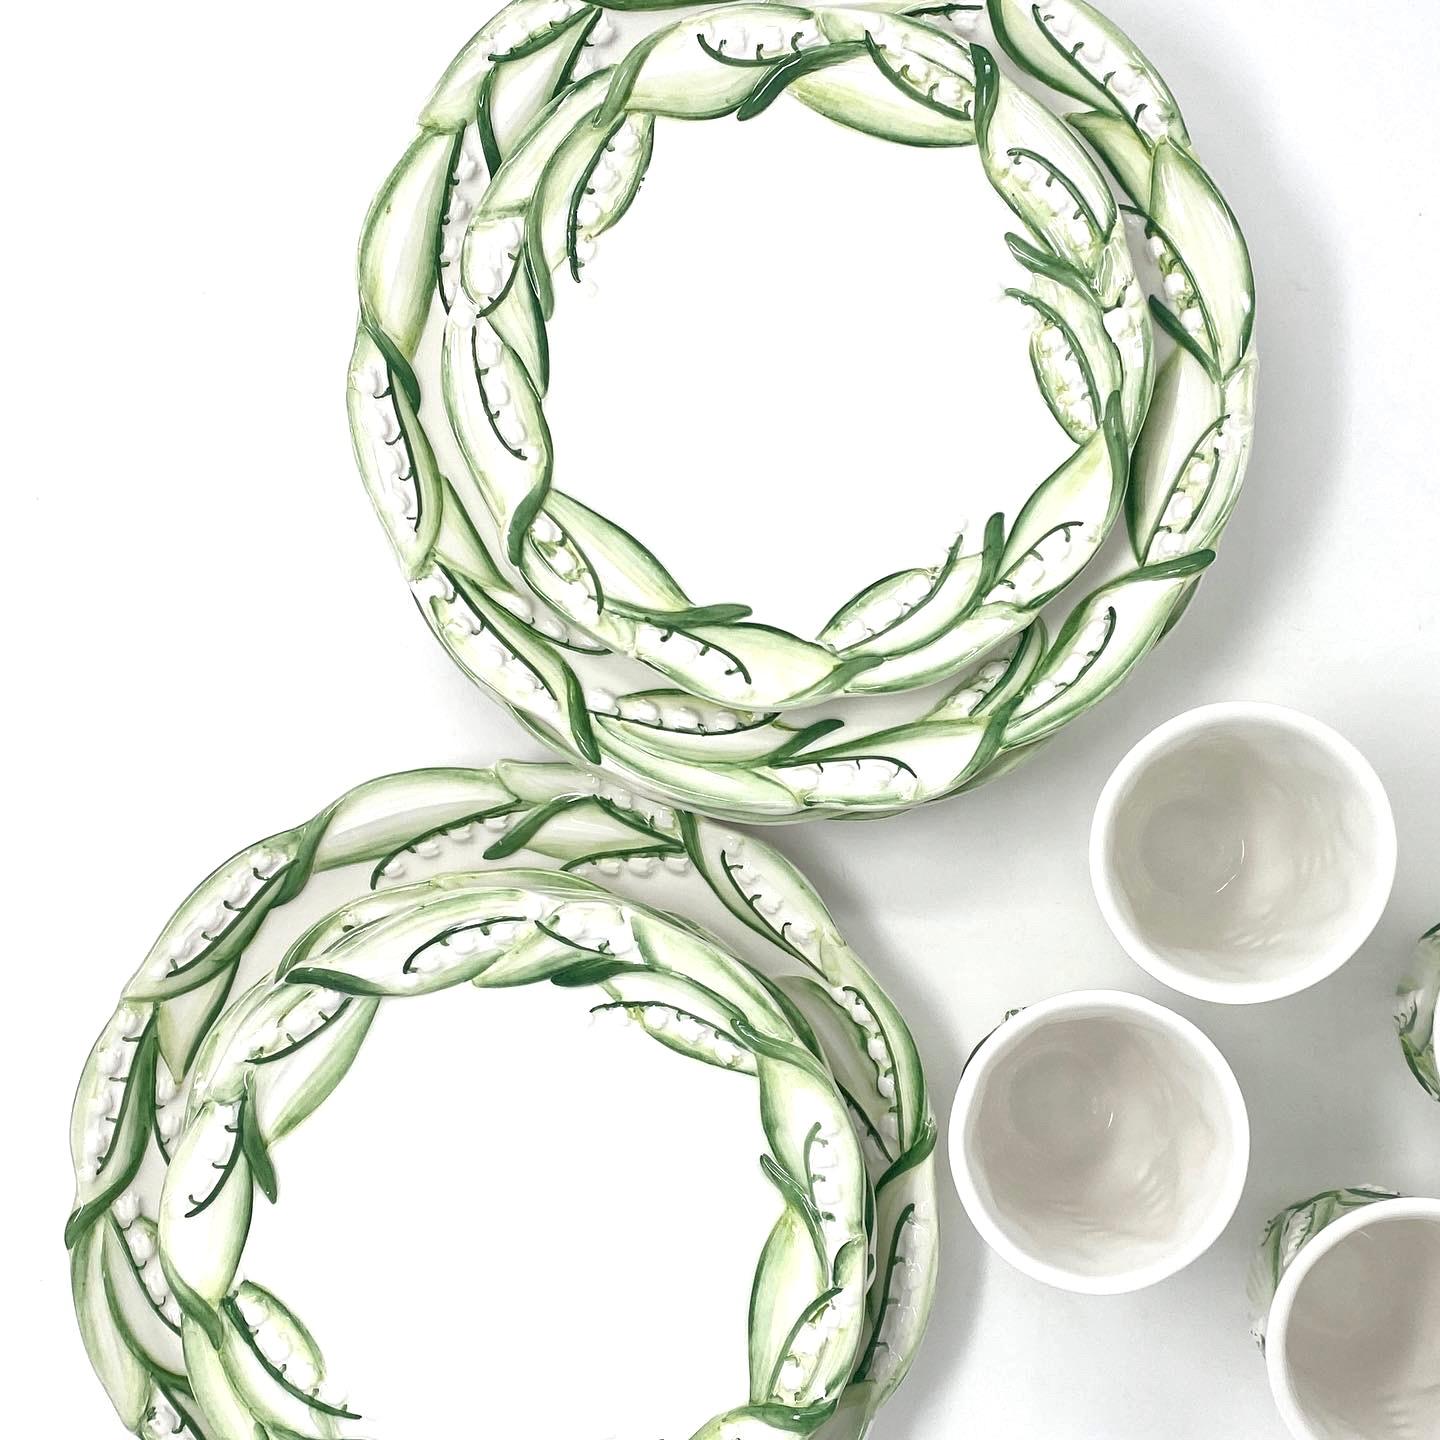 Majolica Lily of the Valley Dinner Plates, Handmade in Italy, Set of 4 for The Mane Lion

The Mane Lion was born in 1979 in the heart of Philadelphia's fabled Main Line, offering a line of charming, hand-painted chip-and-dip serving pieces that